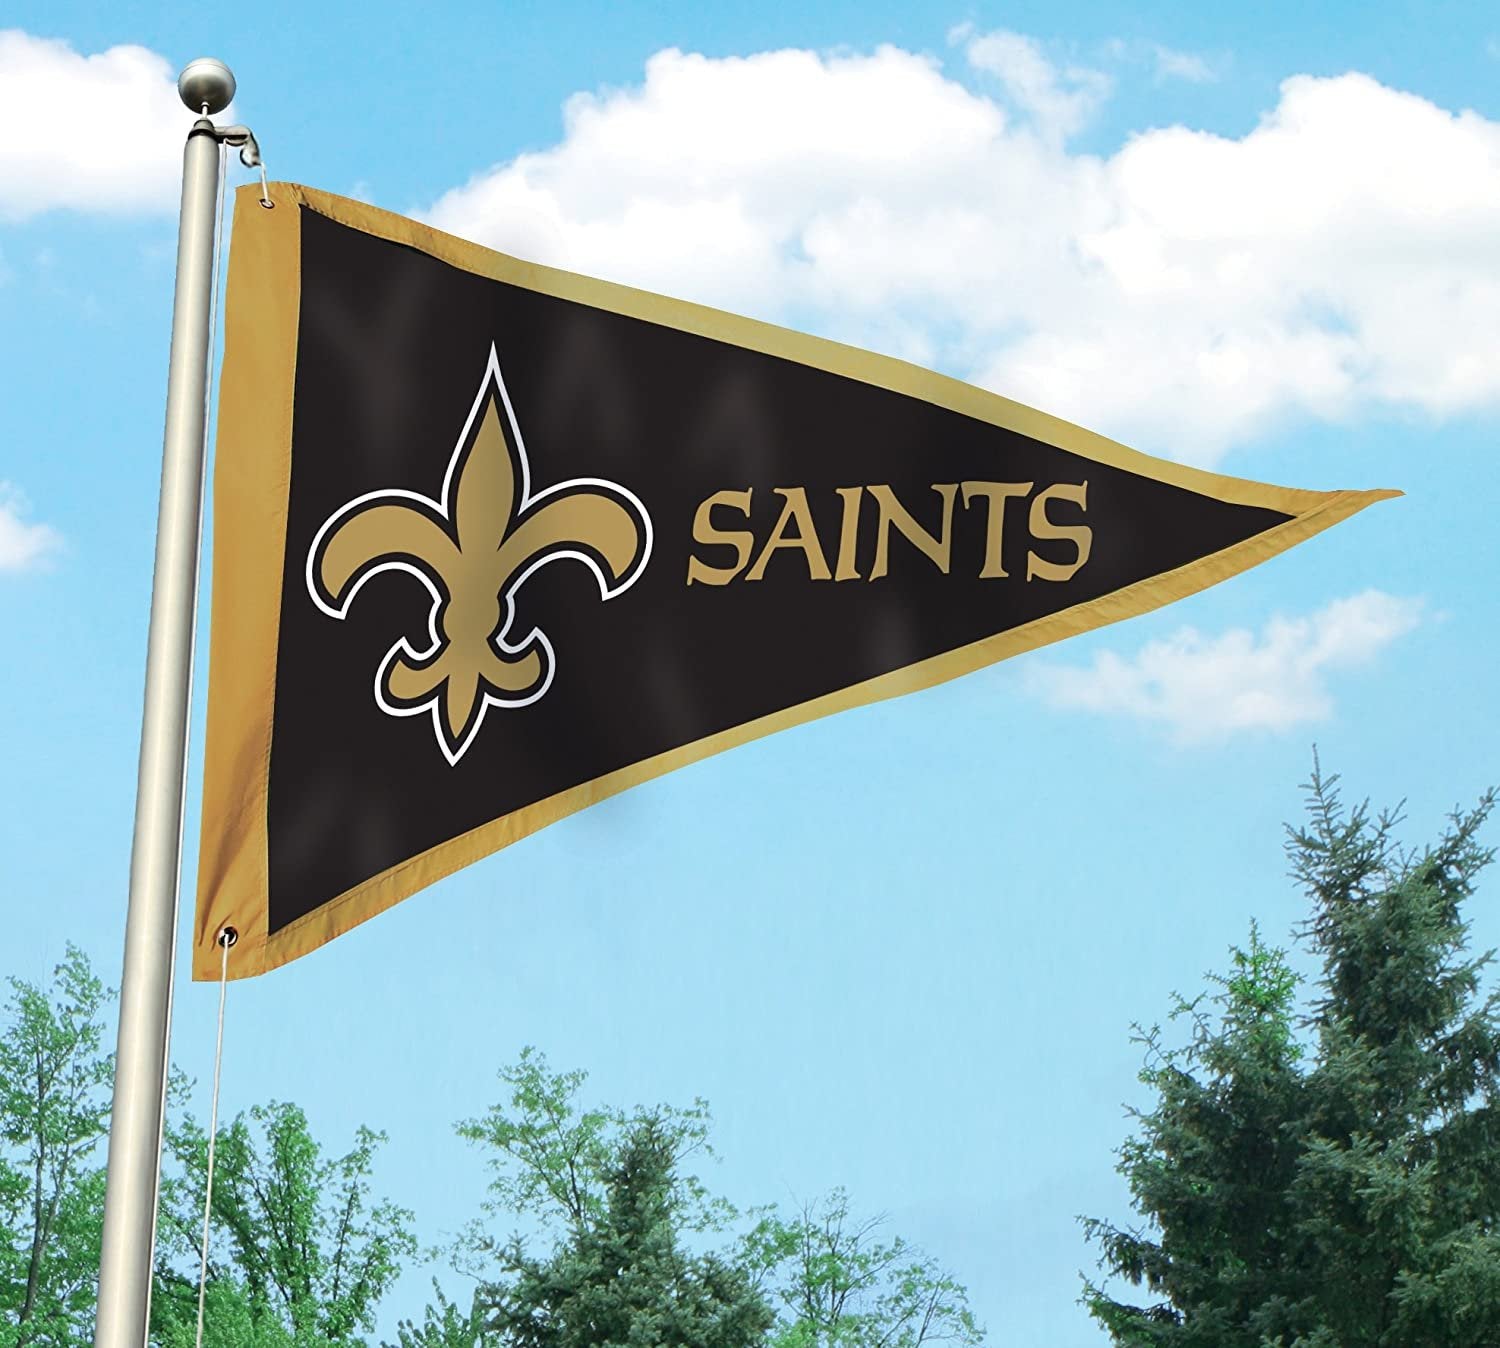 New Orleans Saints Premium 3x5 Flag Banner, Pennant Design, Applique, Indoor or Outdoor, Single Sided